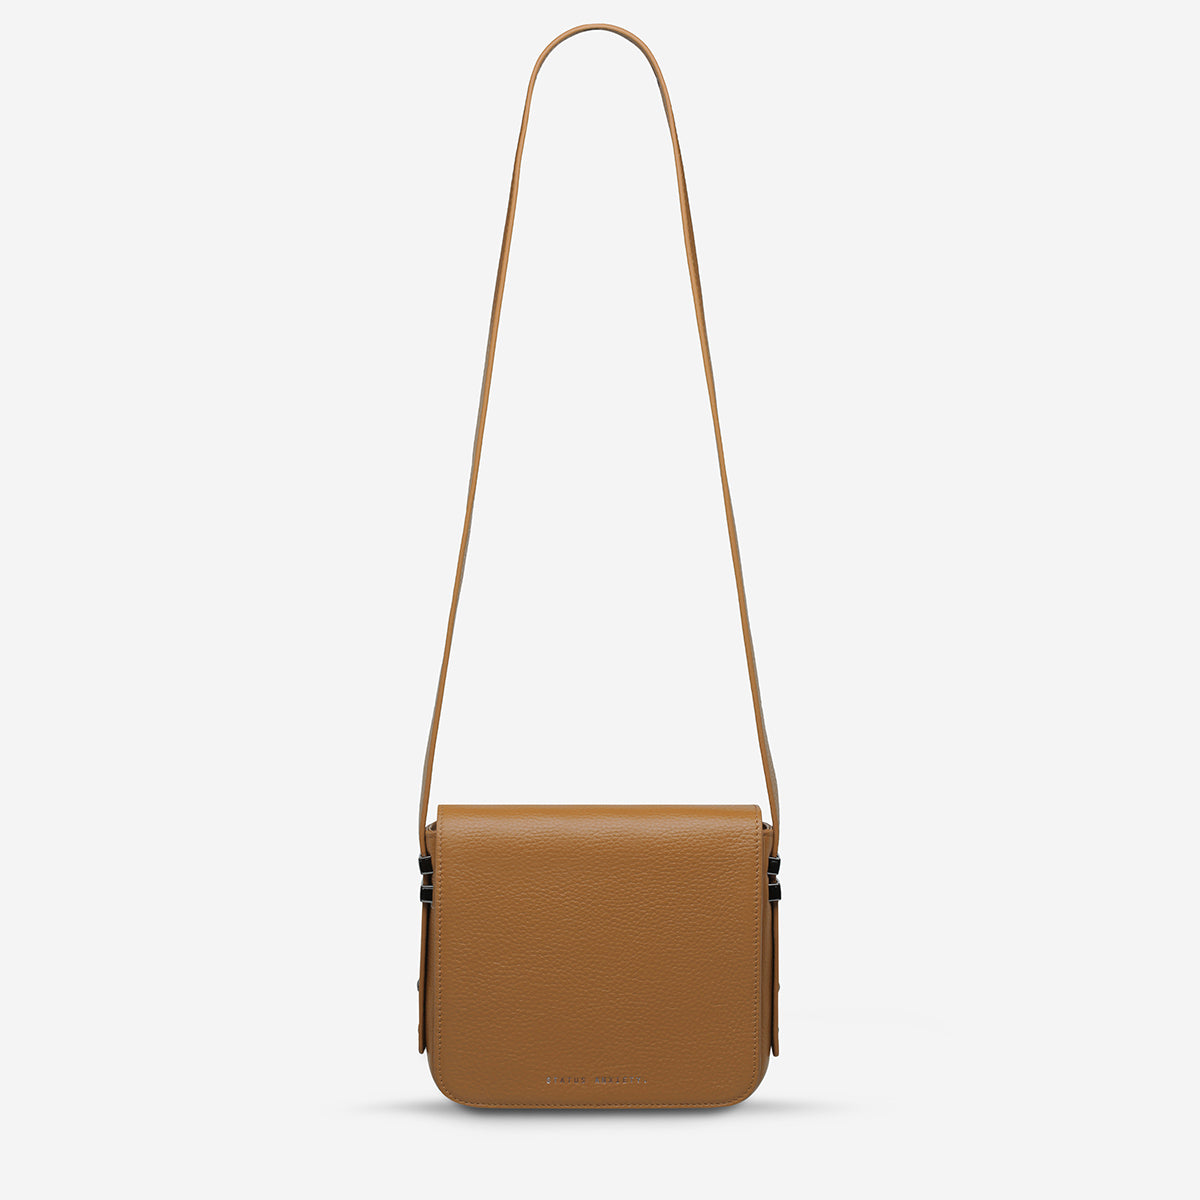 Want To Believe Tan Leather Bag - Status Anxiety - Perth Stockist